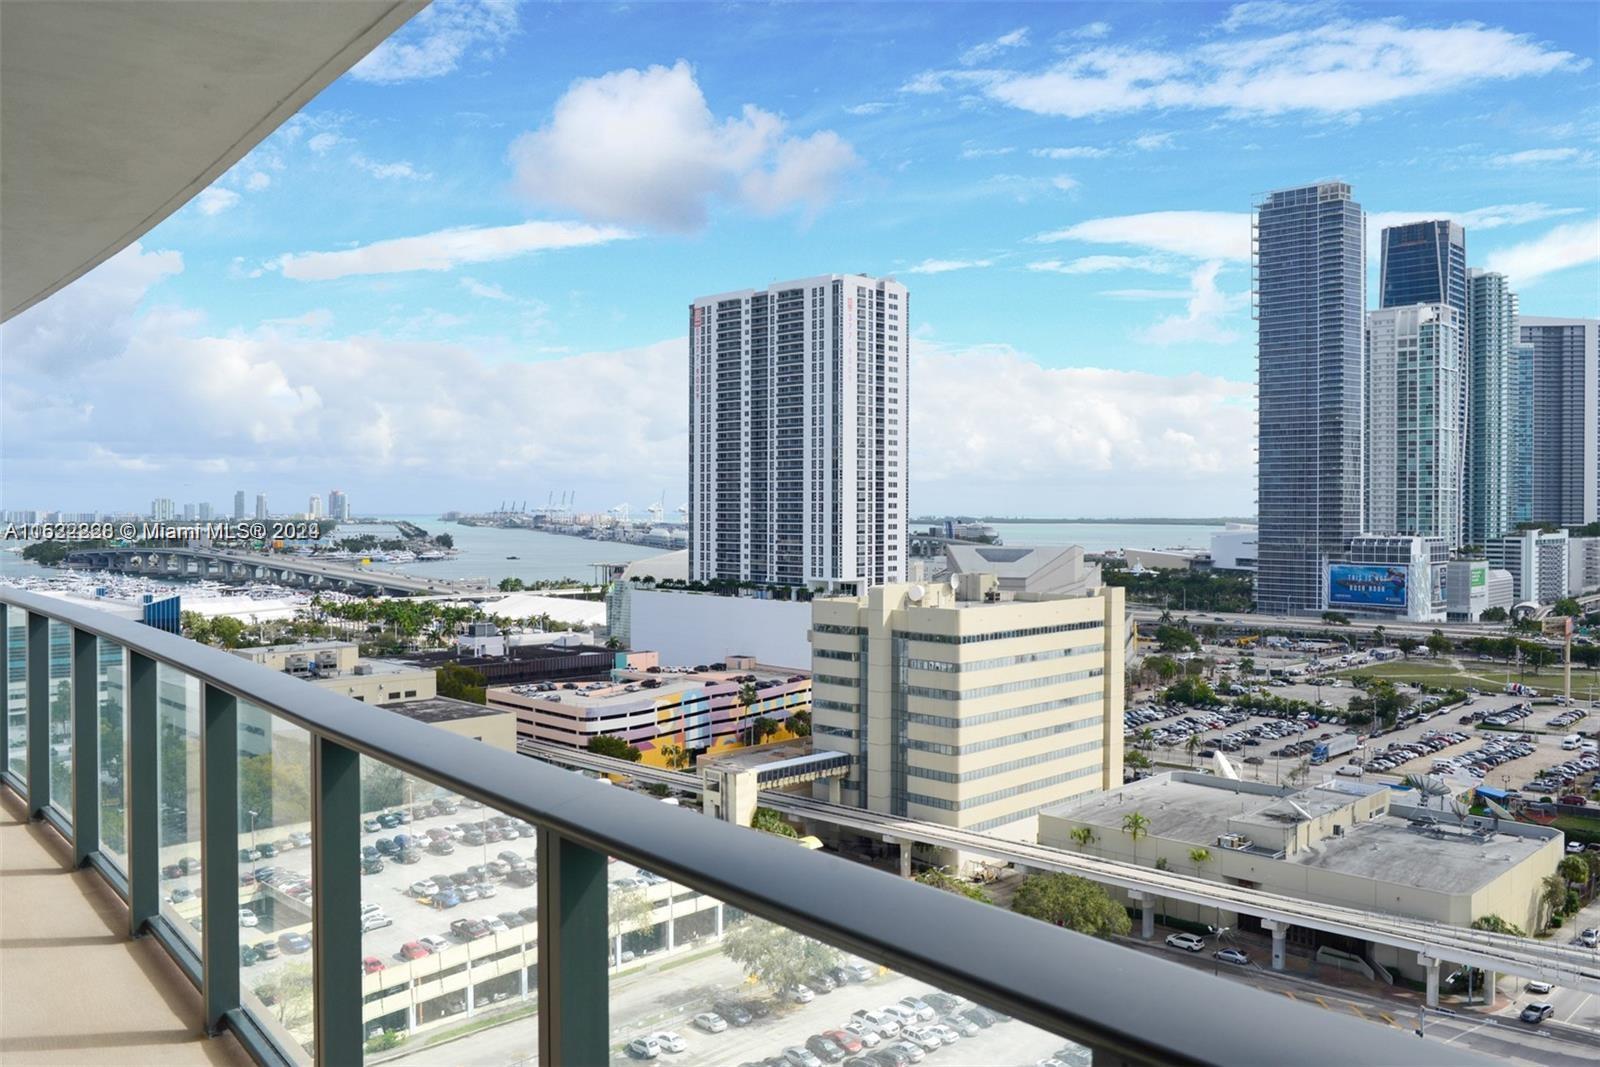 Fully furnished unit with amazing views overlooking Biscayne Bay, Port of Miami & Miami Beach, open kitchen with top-of-the-line appliances, 2 PARKING SPACES. Rent includes water, cable, and internet. The building offers two pools on the 9th floor plus a rooftop pool, racketball court, gym, lounge area, two massage rooms, yoga room, movie theater, & children's room! Located in the heart of the Arts & Entertainment District, walking distance from Metro Public Transportation, Arsht Opera, American Airlines Arena, Museum Park, & close to Wynwood, Design District, Brickell, & Miami Beach. TENANT OCCUPIED, Lease ends March 31, 2024. 24 to 48 hour notice for showings.